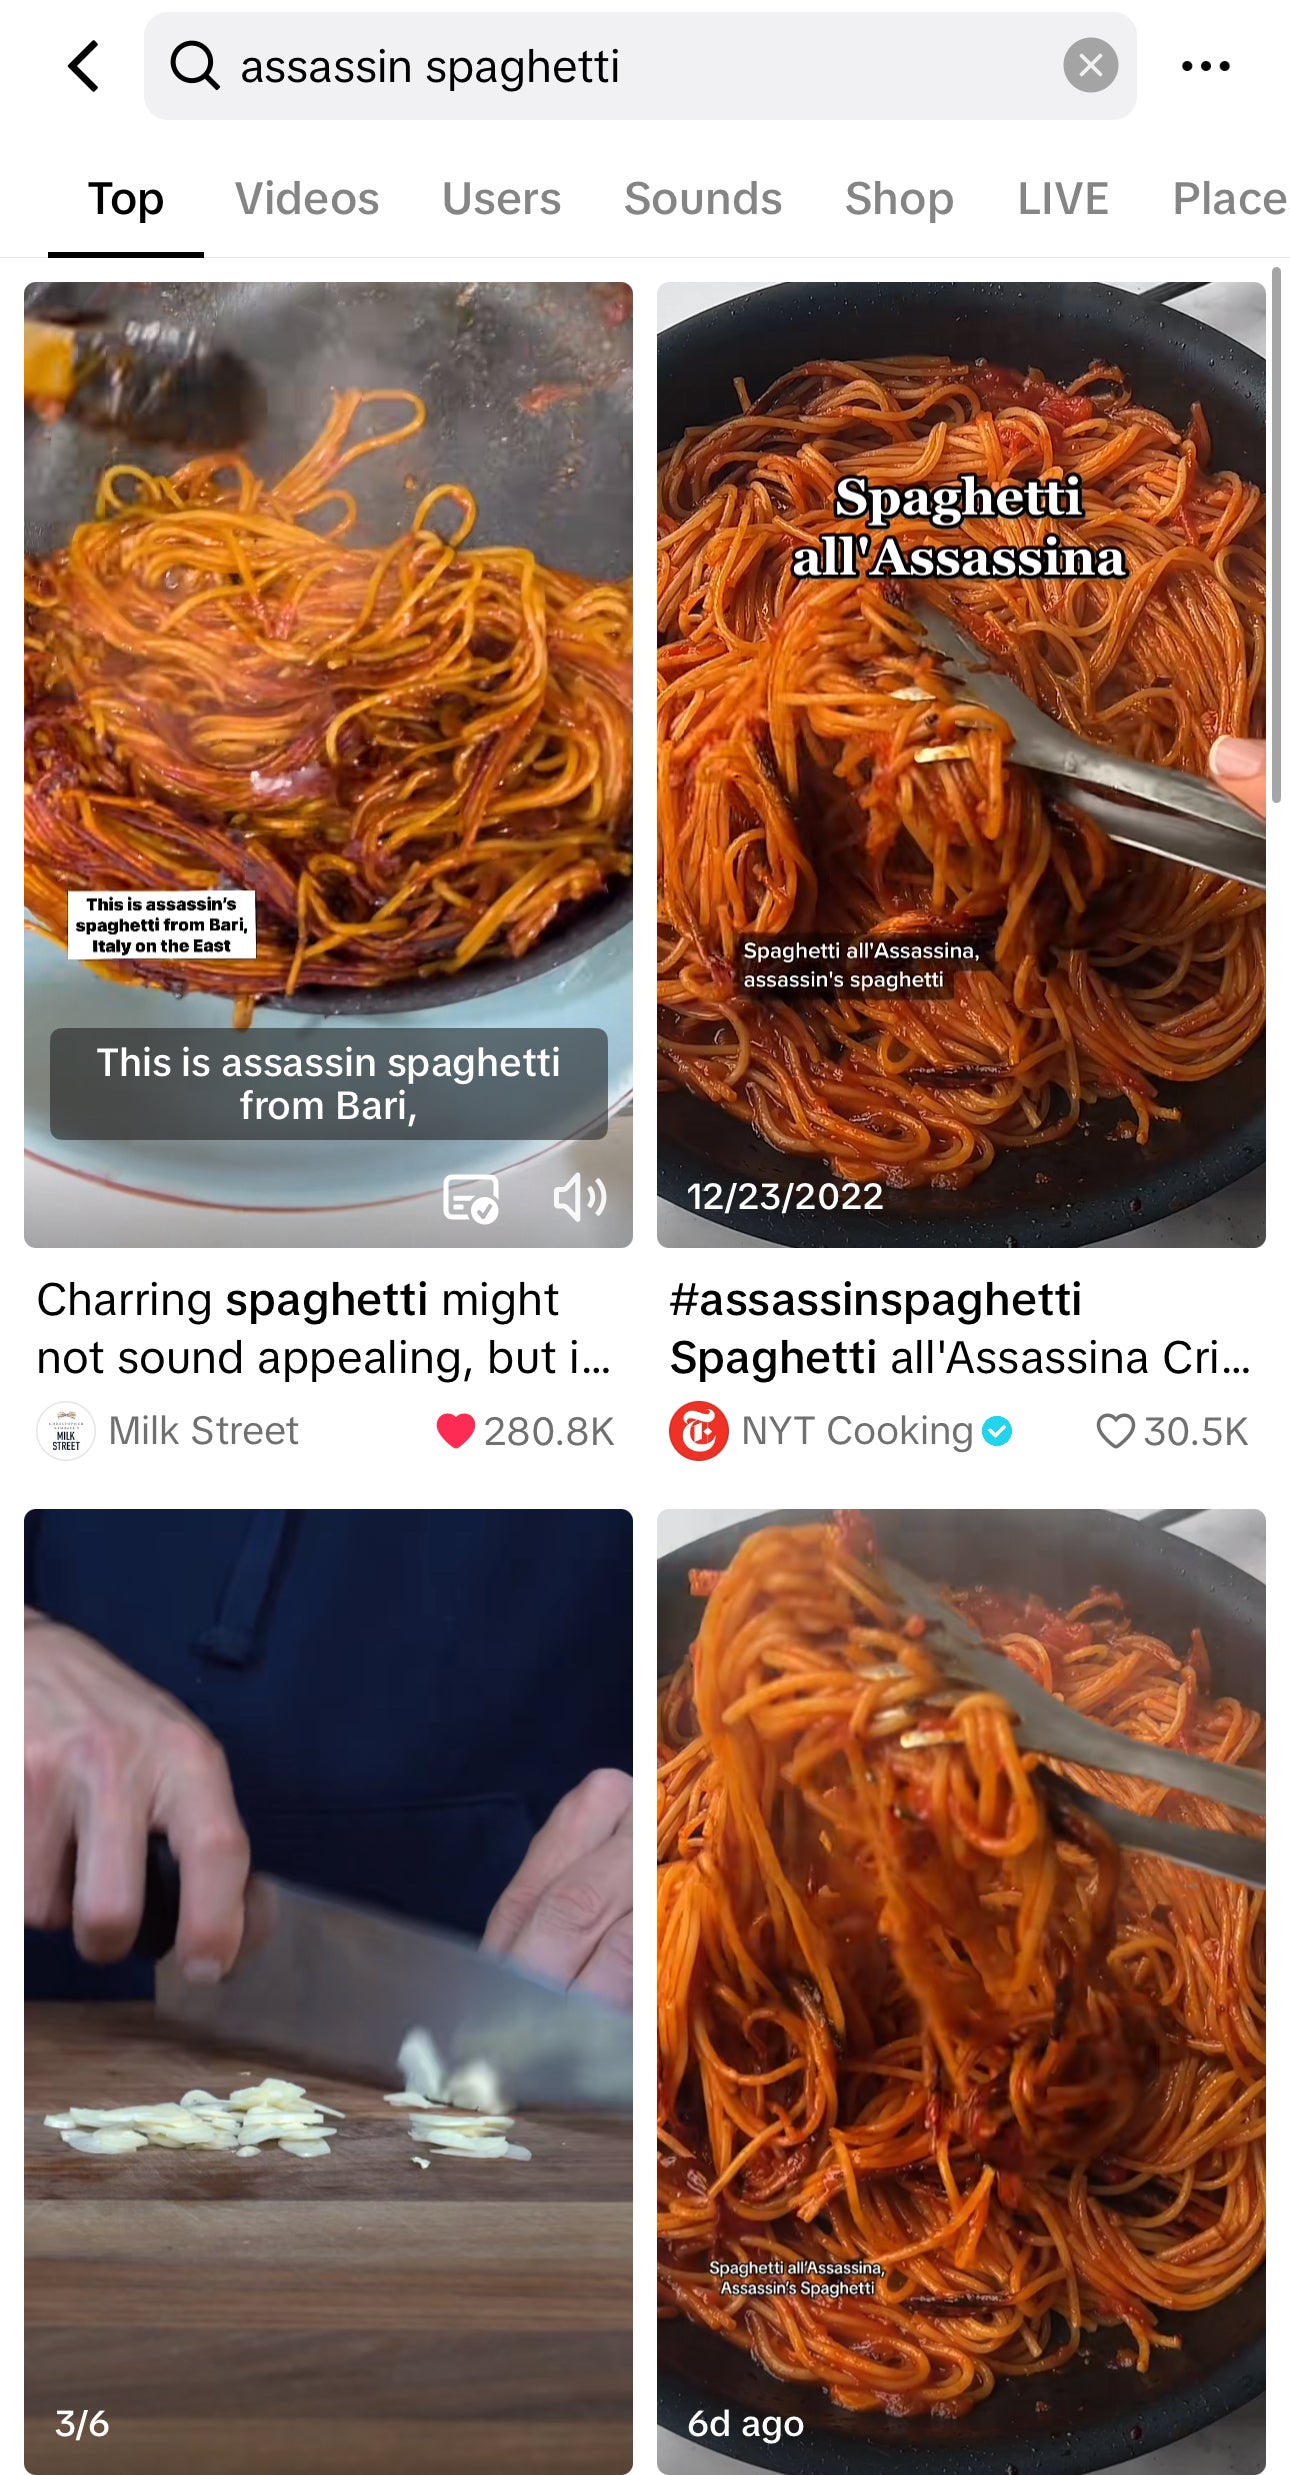 Search results for &#x27;assassin spaghetti&#x27; showing various images and videos of spaghetti dishes, with textual overlays and user interactions